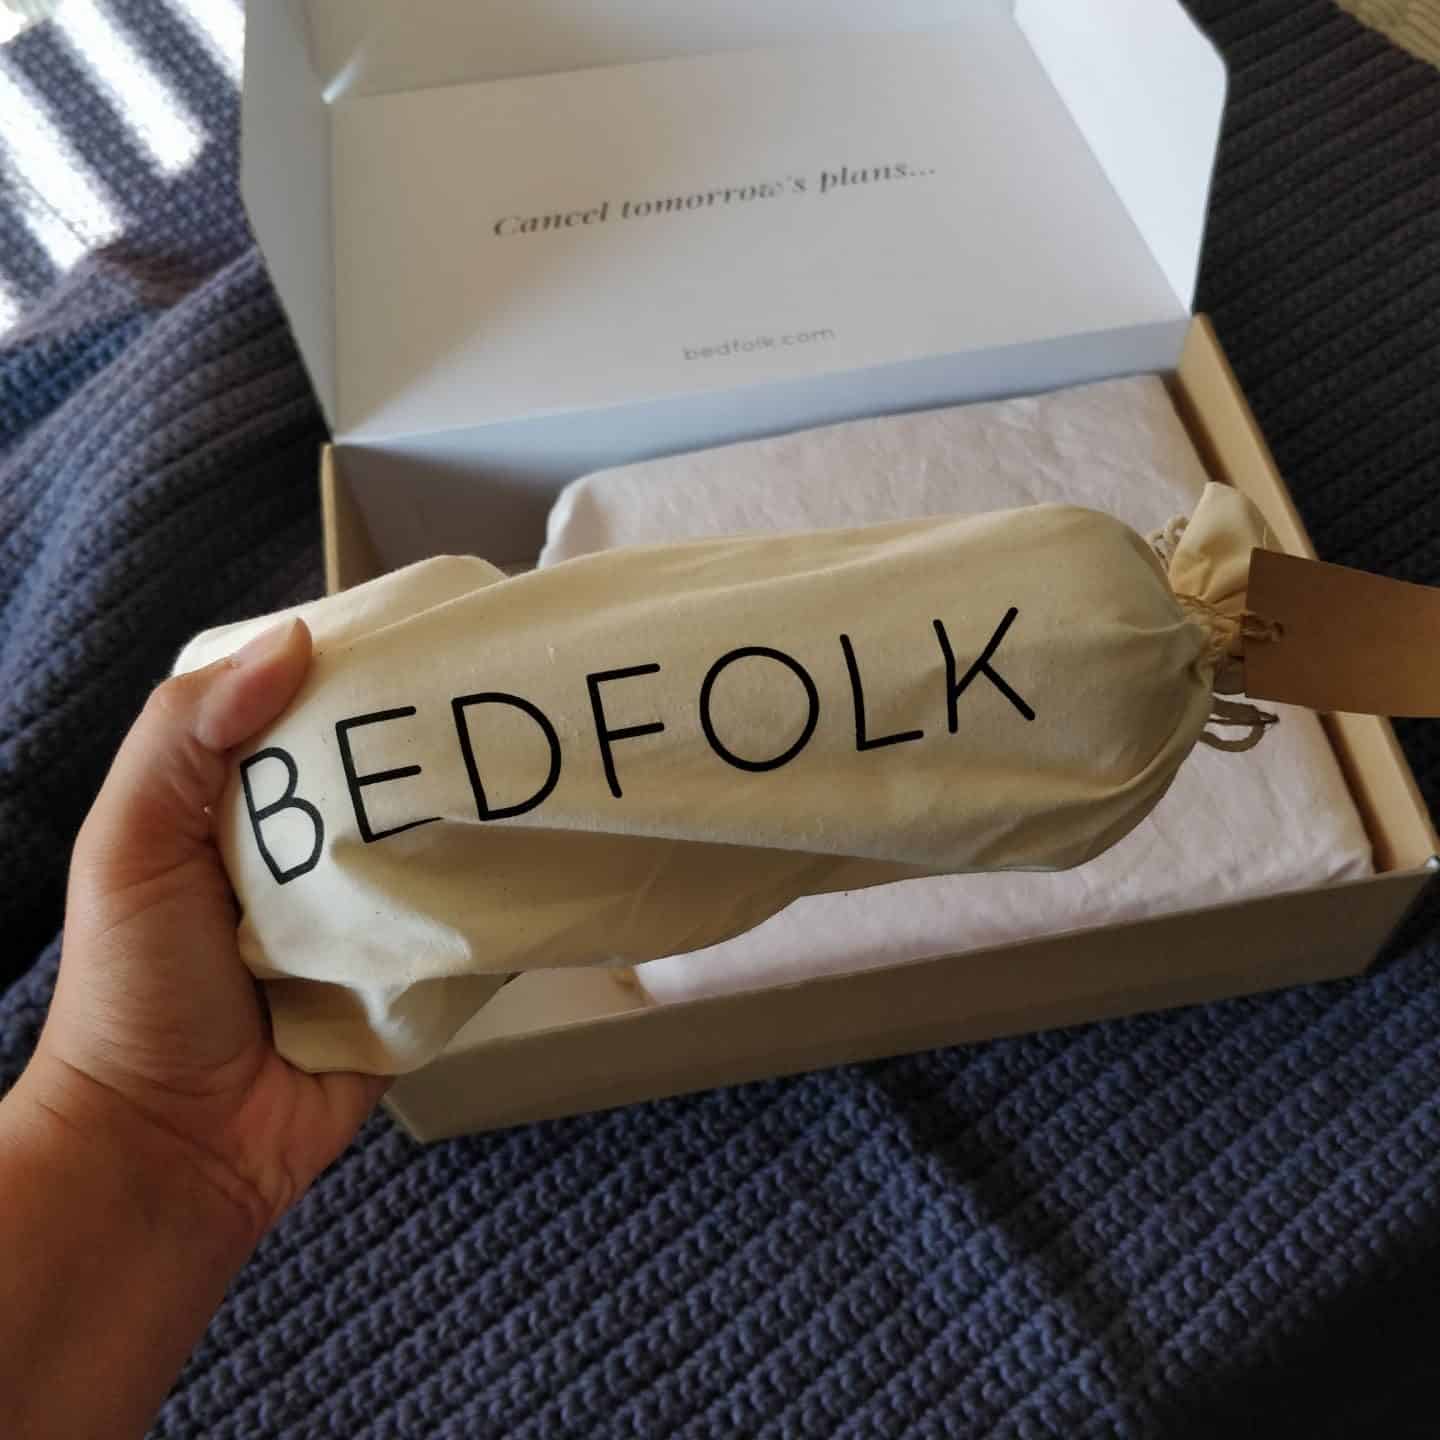 Bedfolk natural cotton bedding in packing